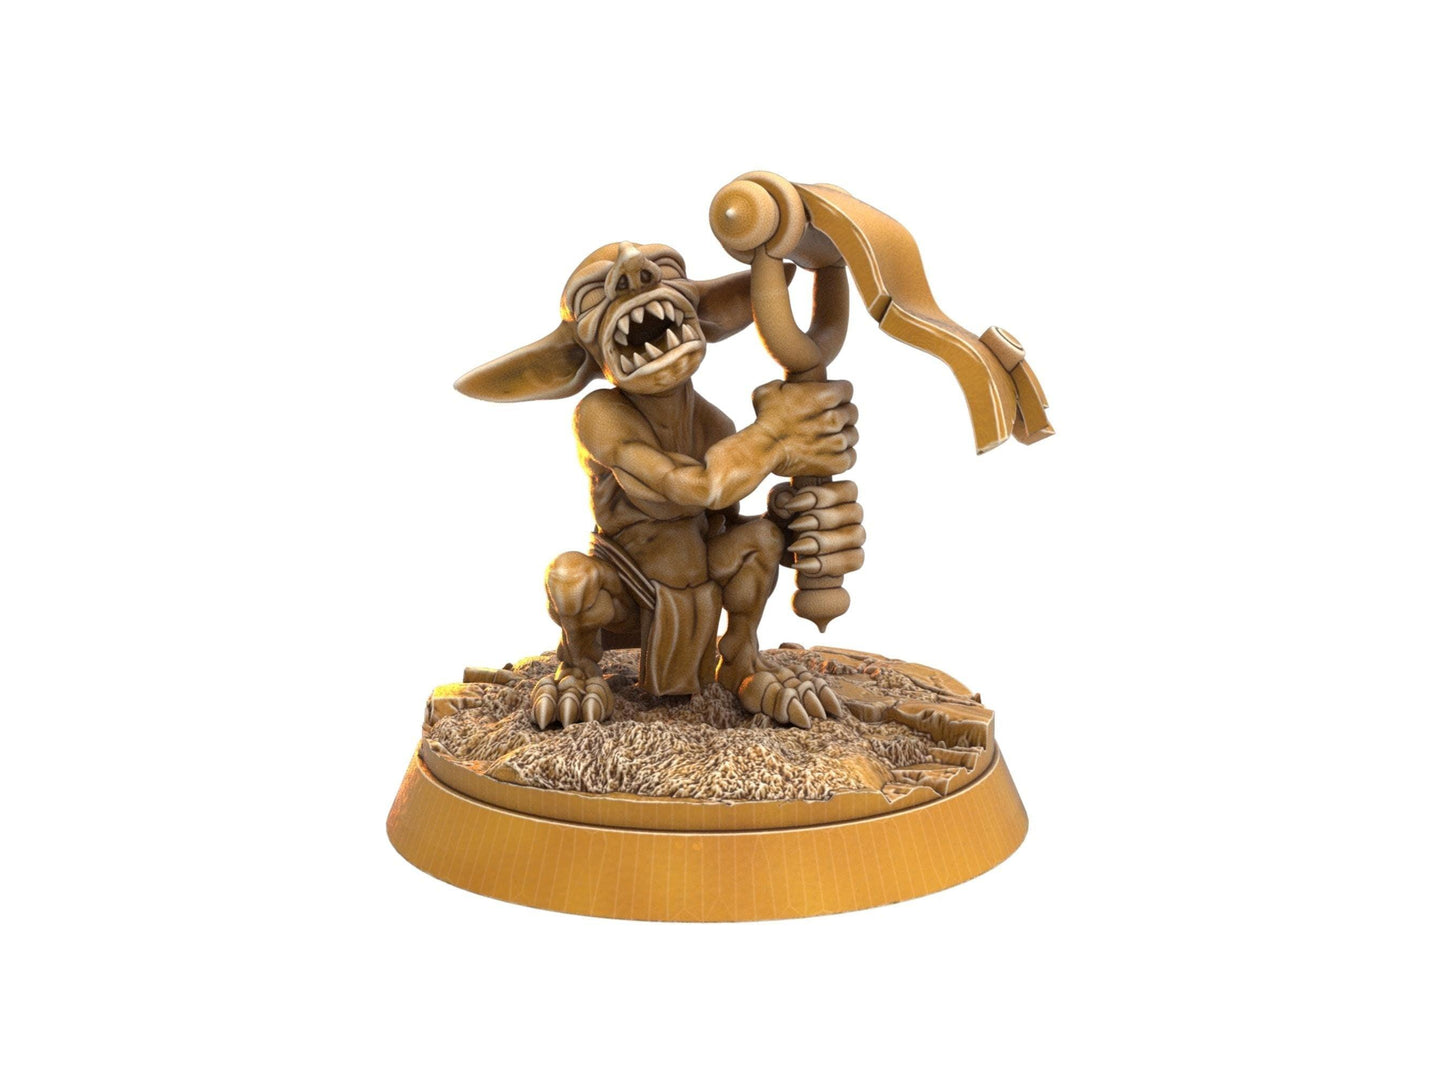 DnD Monster Goblin Wretchtants Miniature - 6 Poses - 32mm scale Tabletop gaming DnD Miniature Dungeons and Dragons, dnd 5e - Plague Miniatures shop for DnD Miniatures